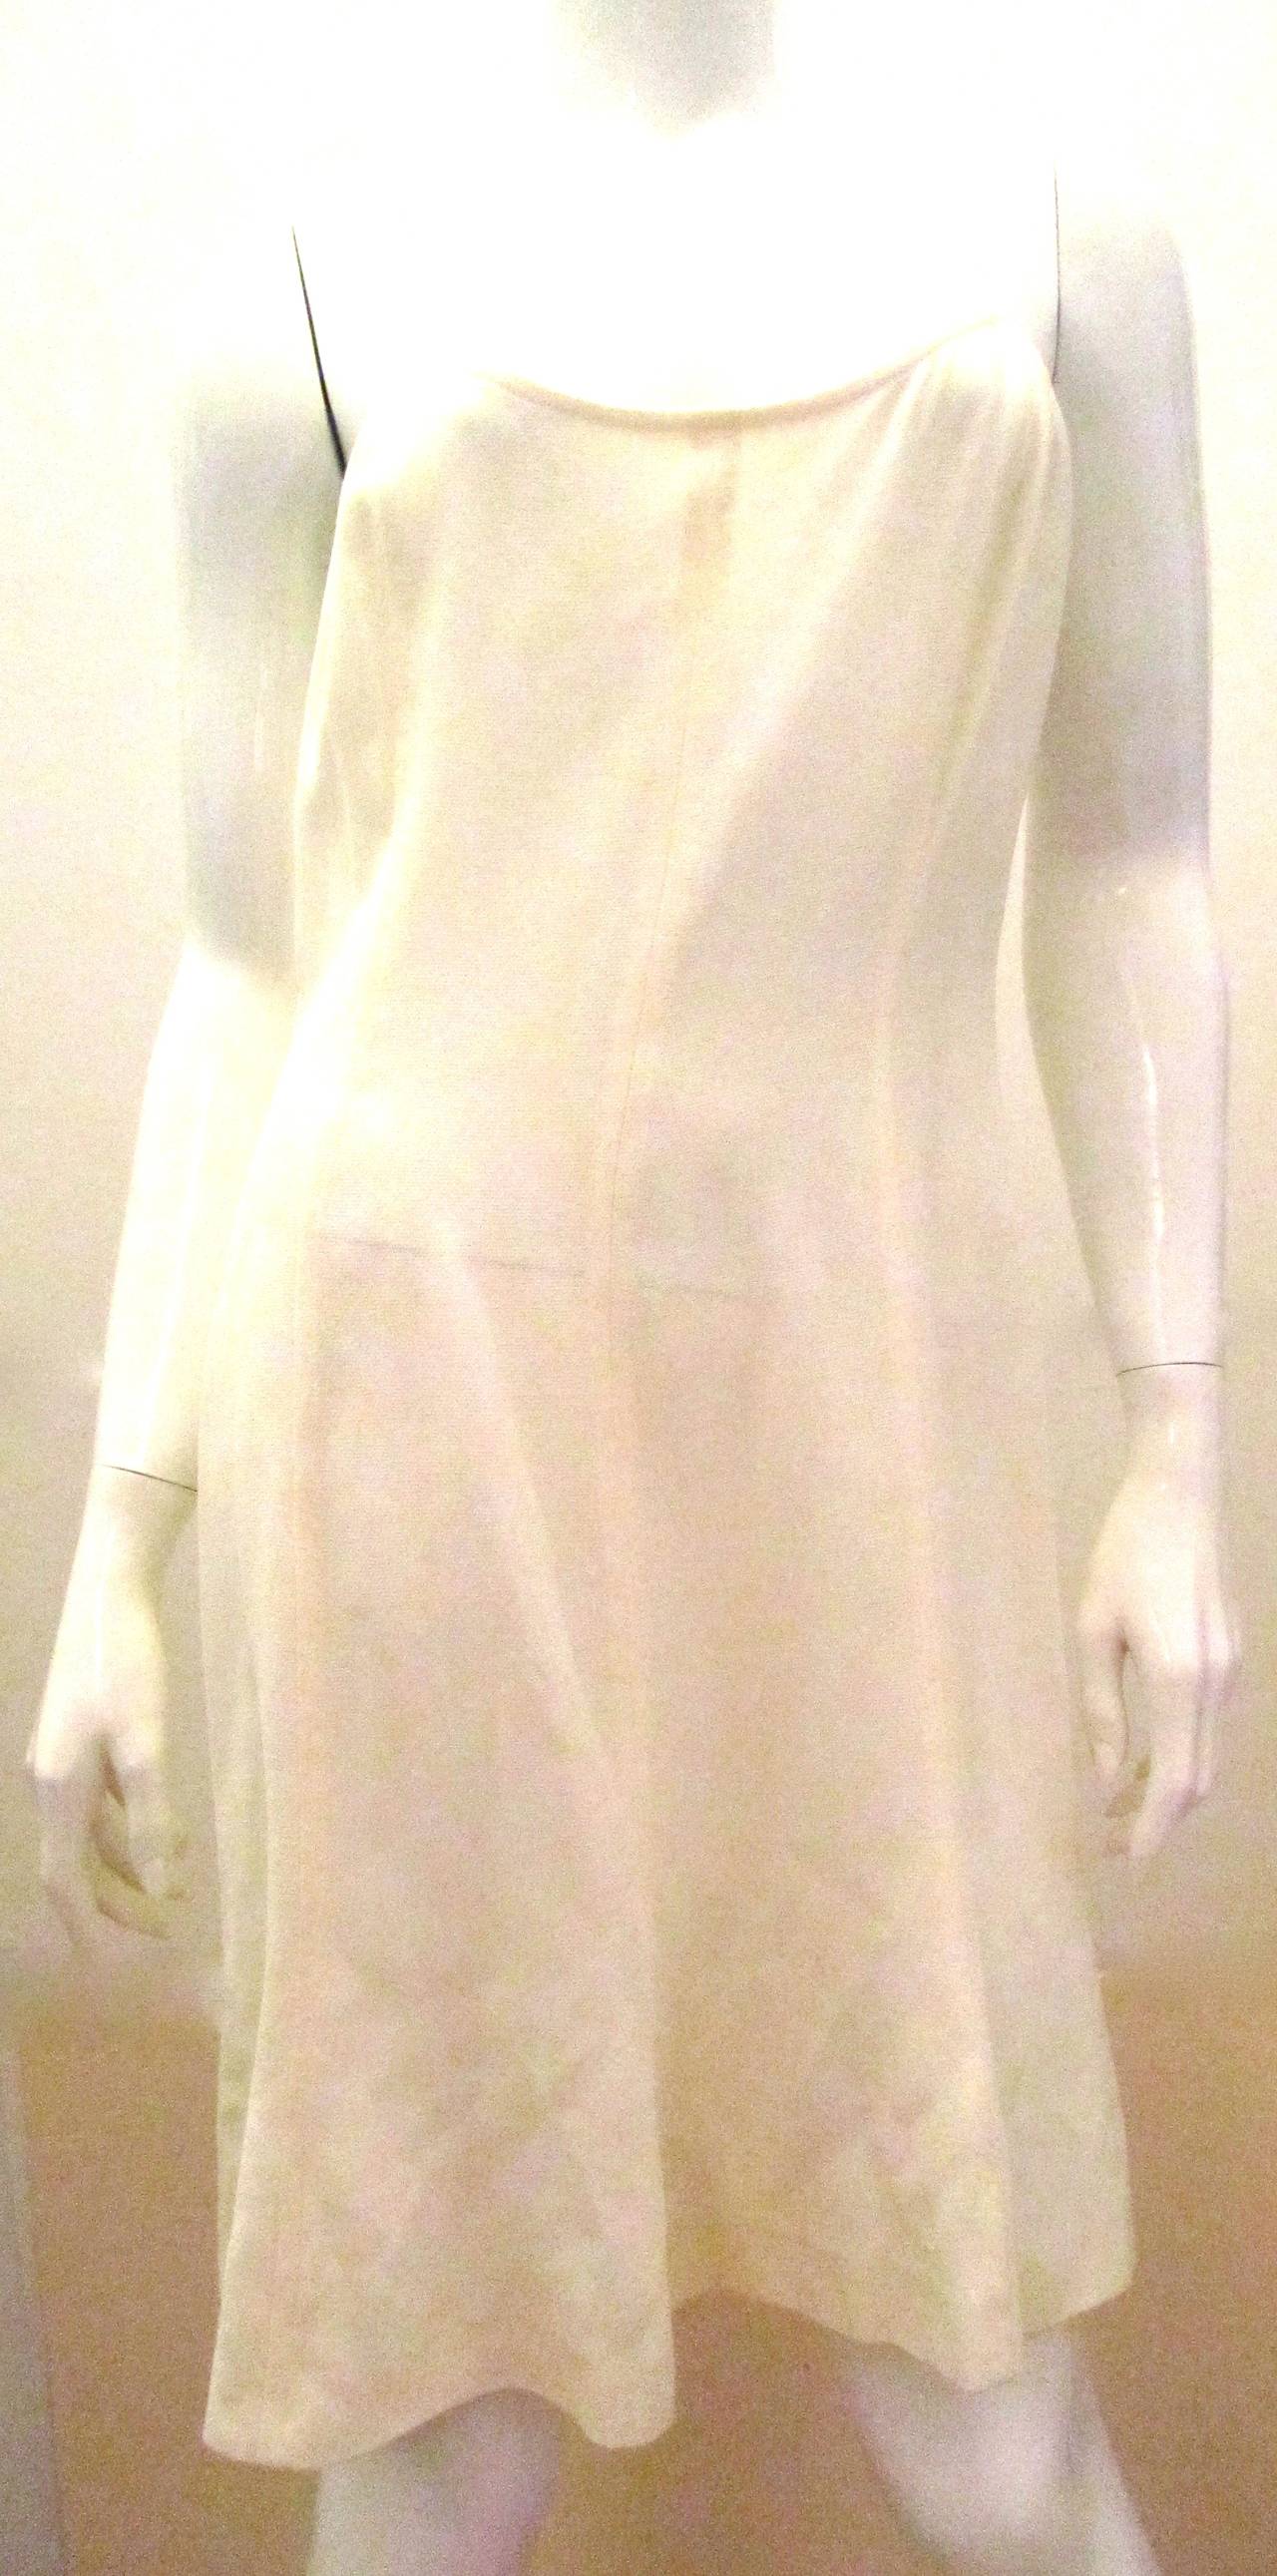 2 Pc Chanel Dress with Jacket - Yellow and White Boucle - Deadstock In New Condition For Sale In Boca Raton, FL